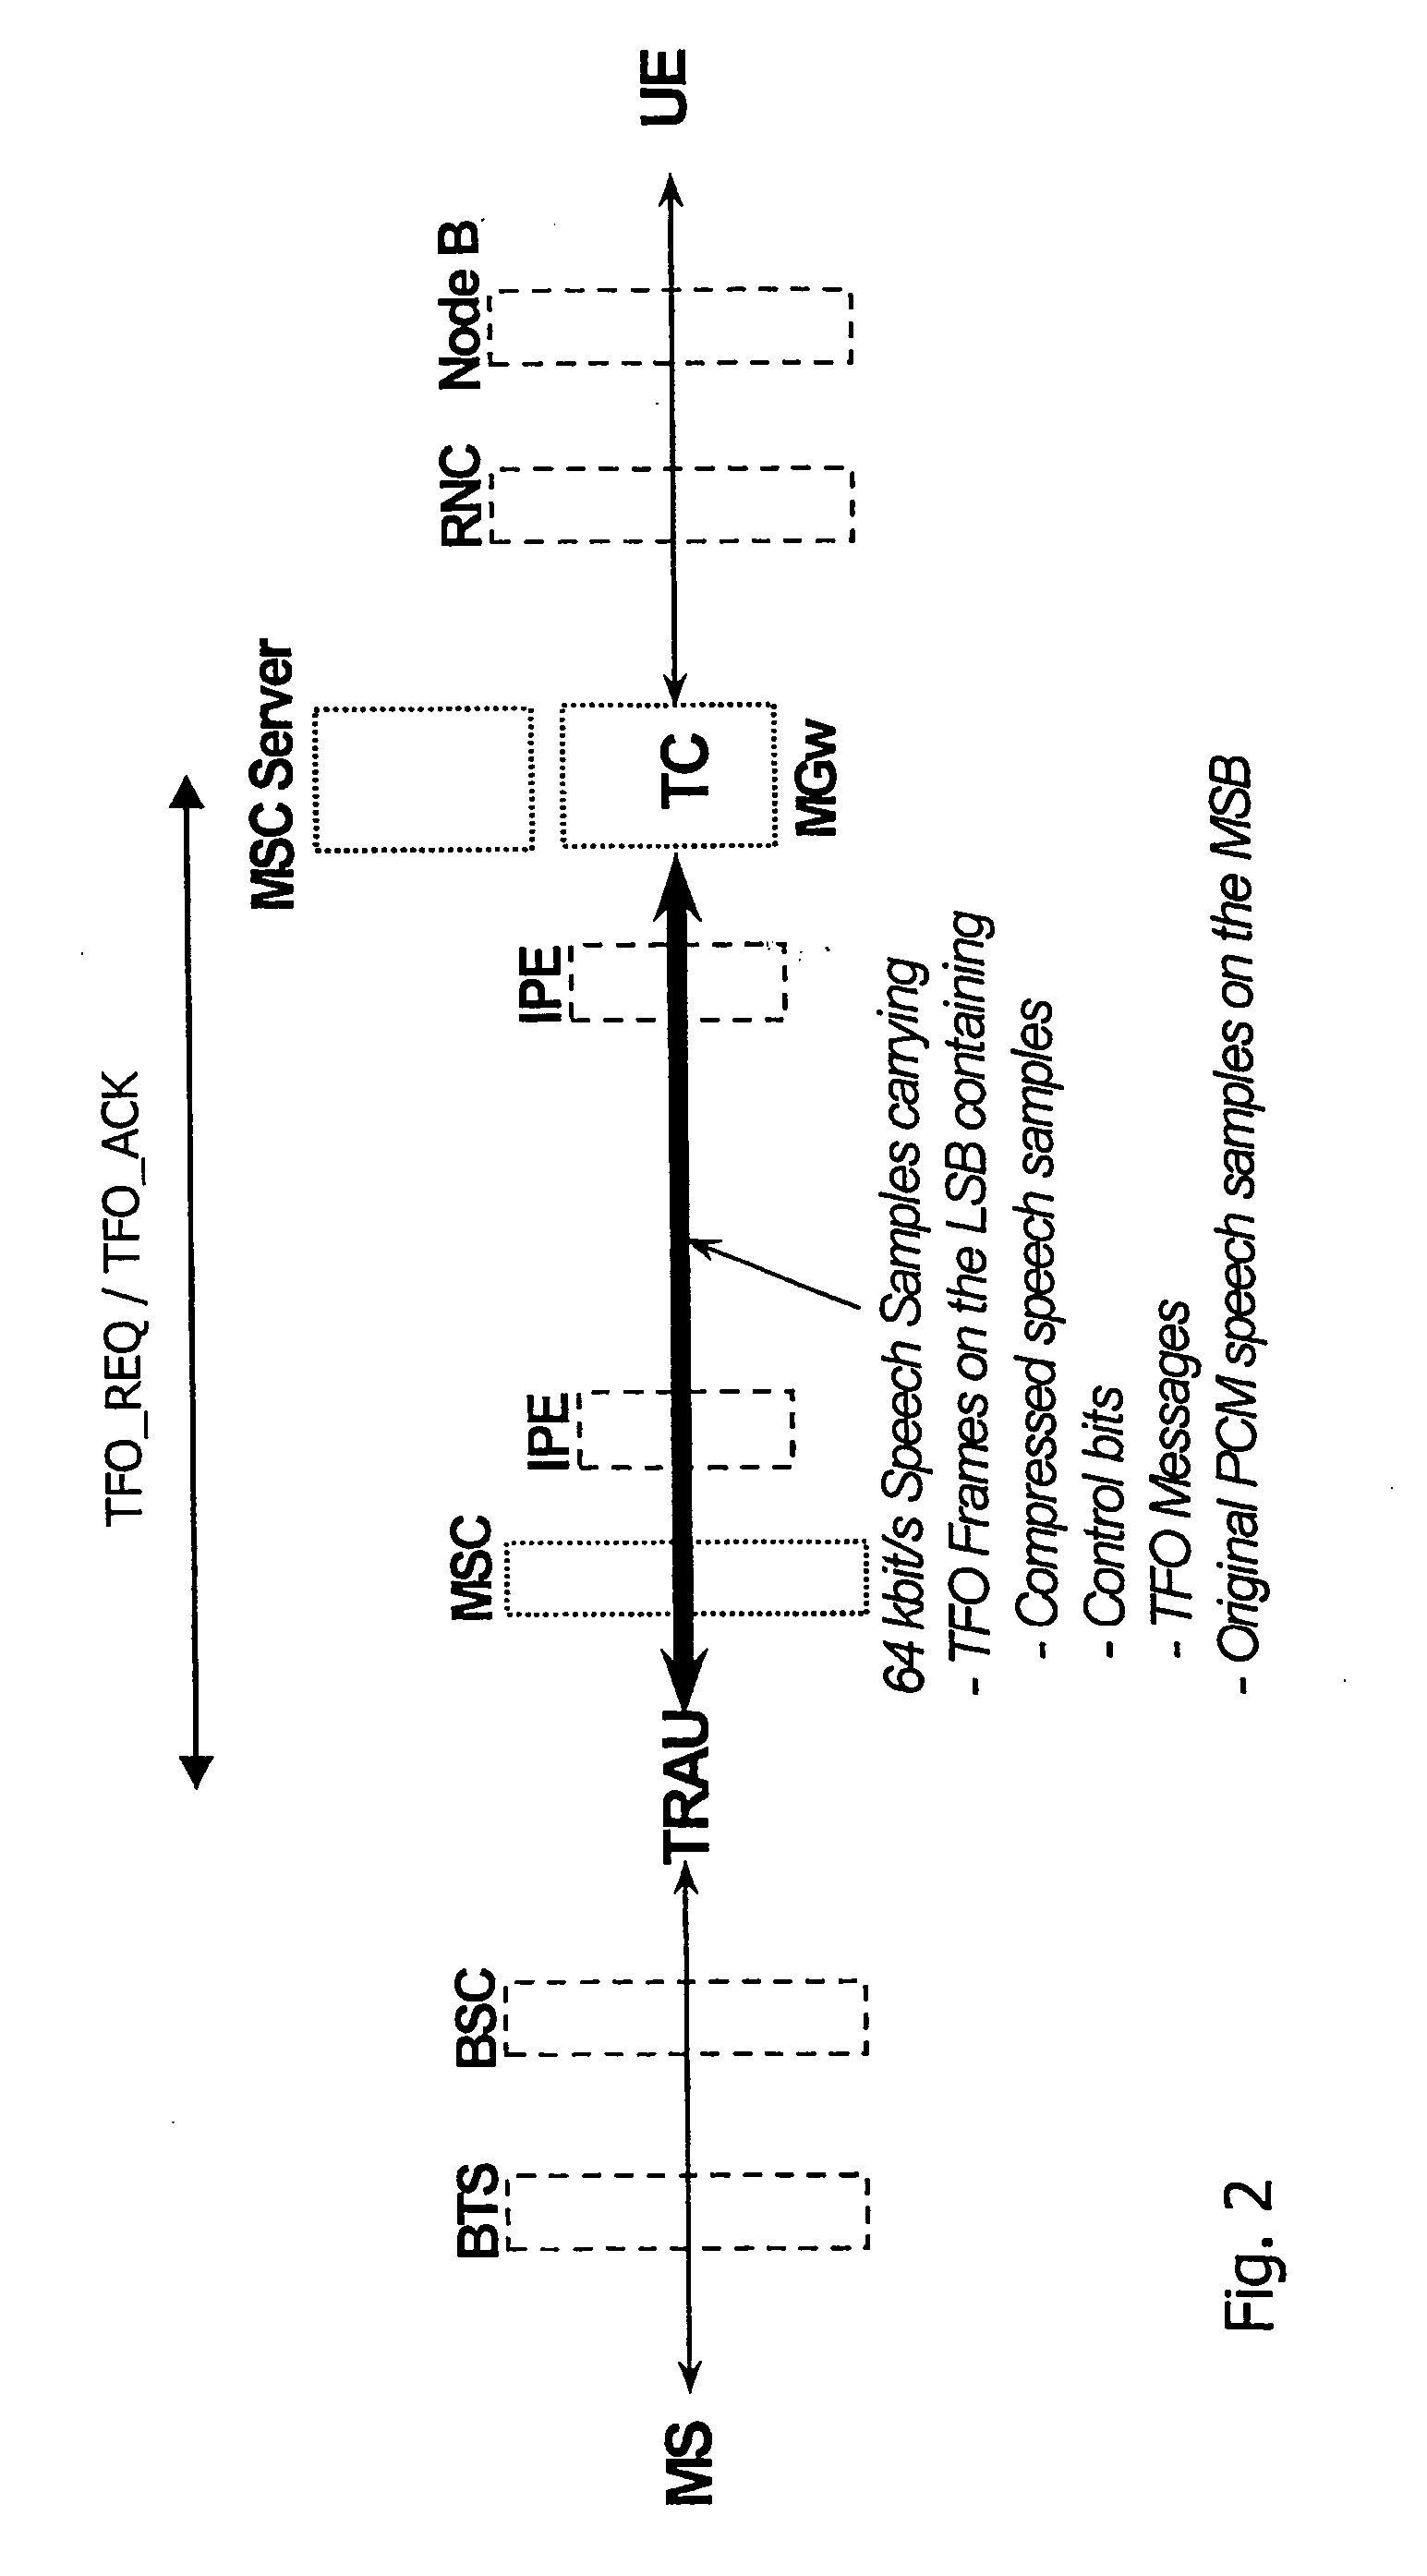 Bypassing transcoding operations in a communication network